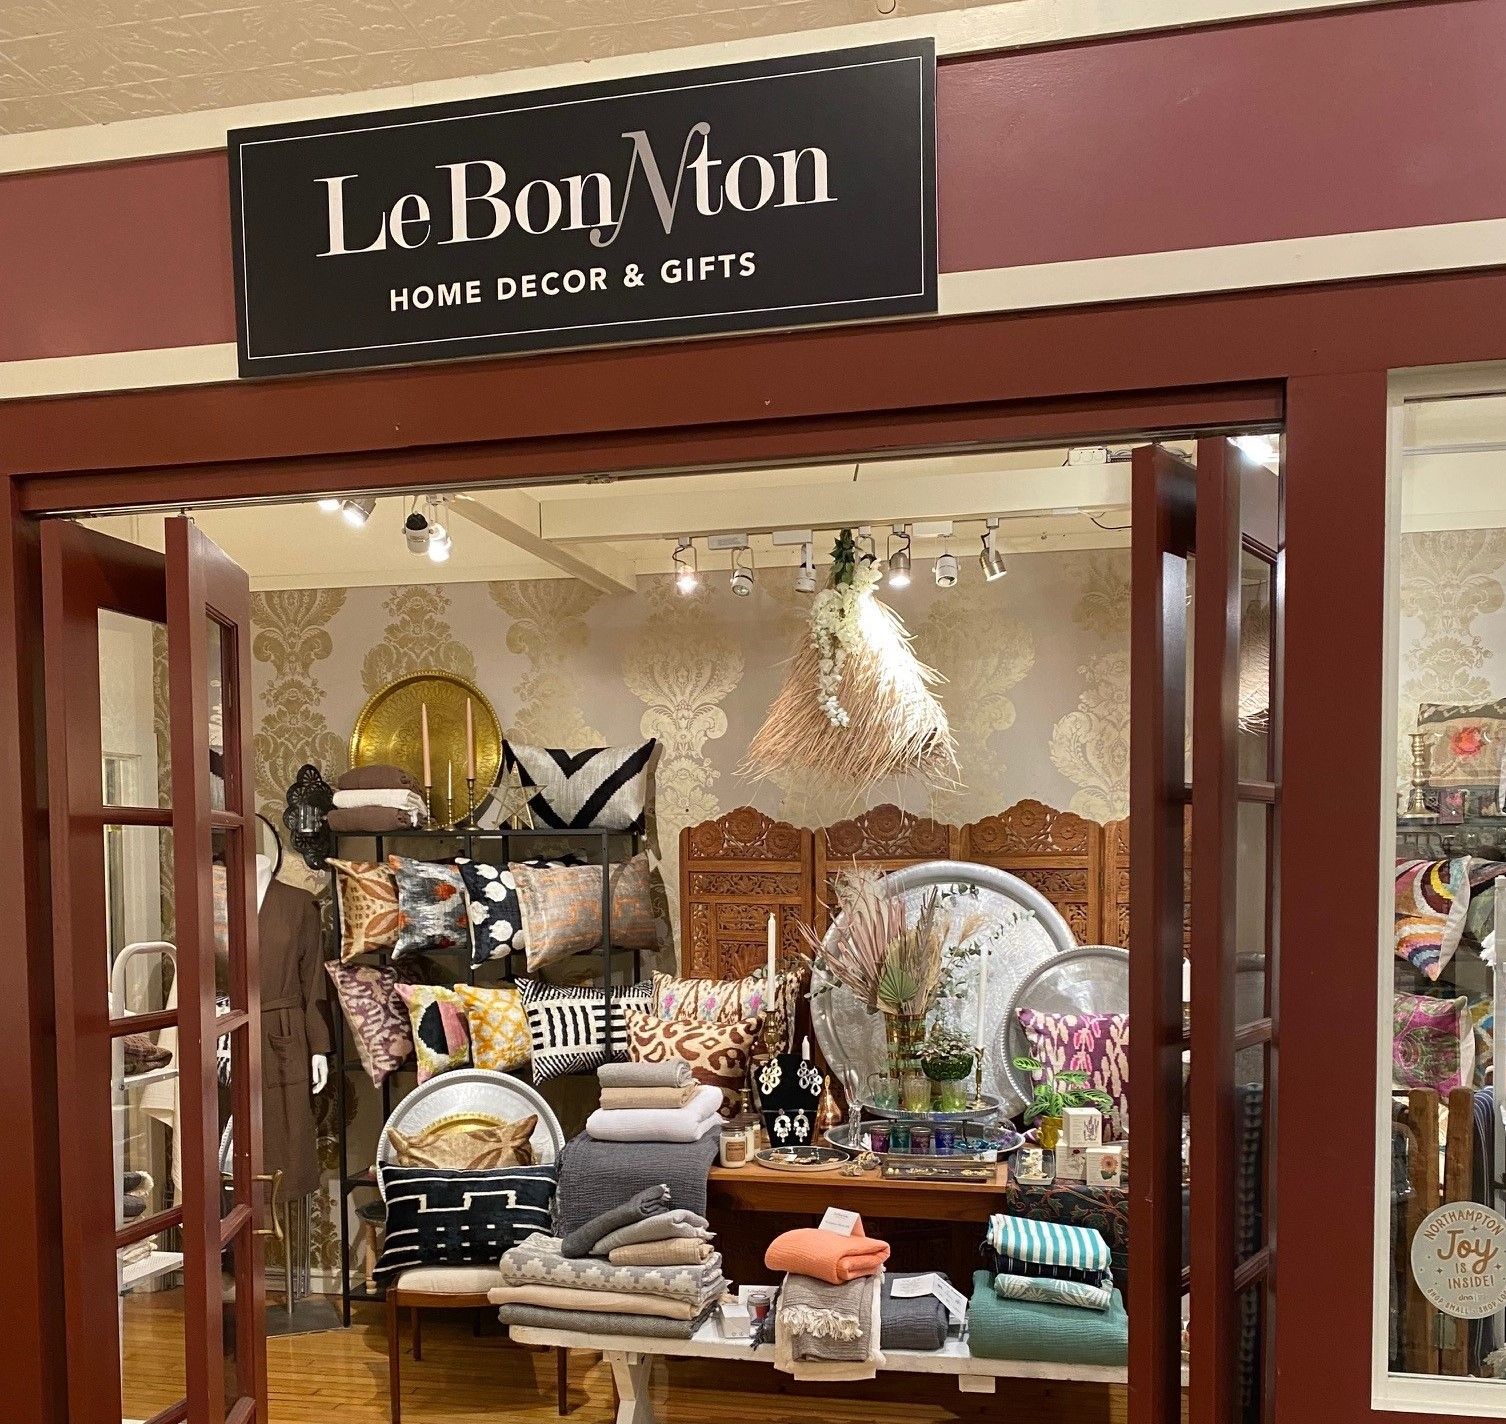 Globally inspired a unique curation for gifting and decorating, LeBonNton has delightful items for everyone.